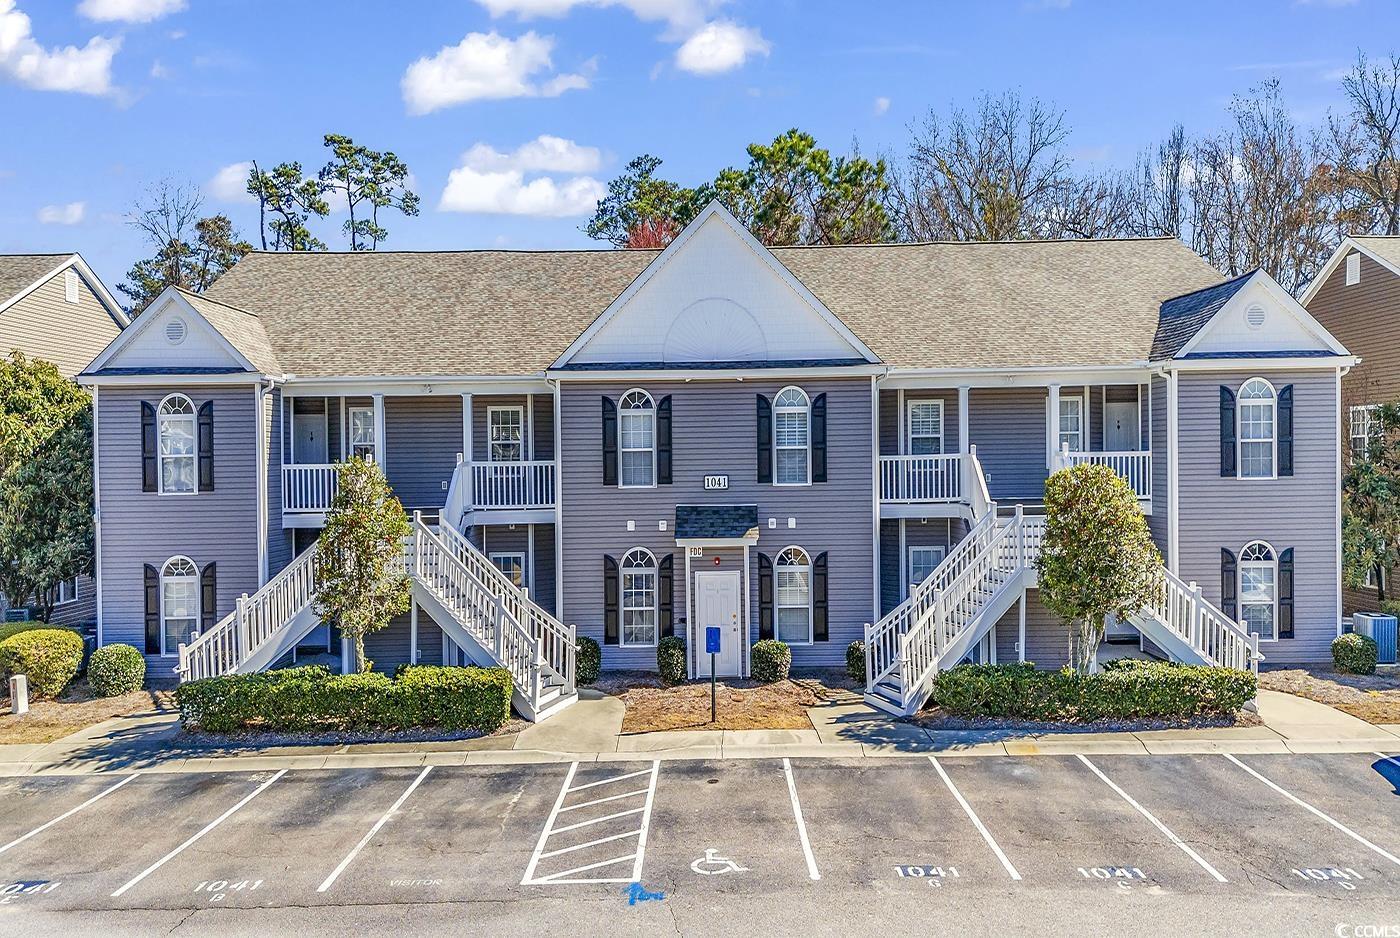 beautiful 3 bedroom, 2 bath condominium on the first floor, backs up to woods with a view of a pretty little pond from the screened porch in gated, pawleys pavilion. conveniently located right across the street from the community pool, enjoy the convenience of ground floor living with no steps!